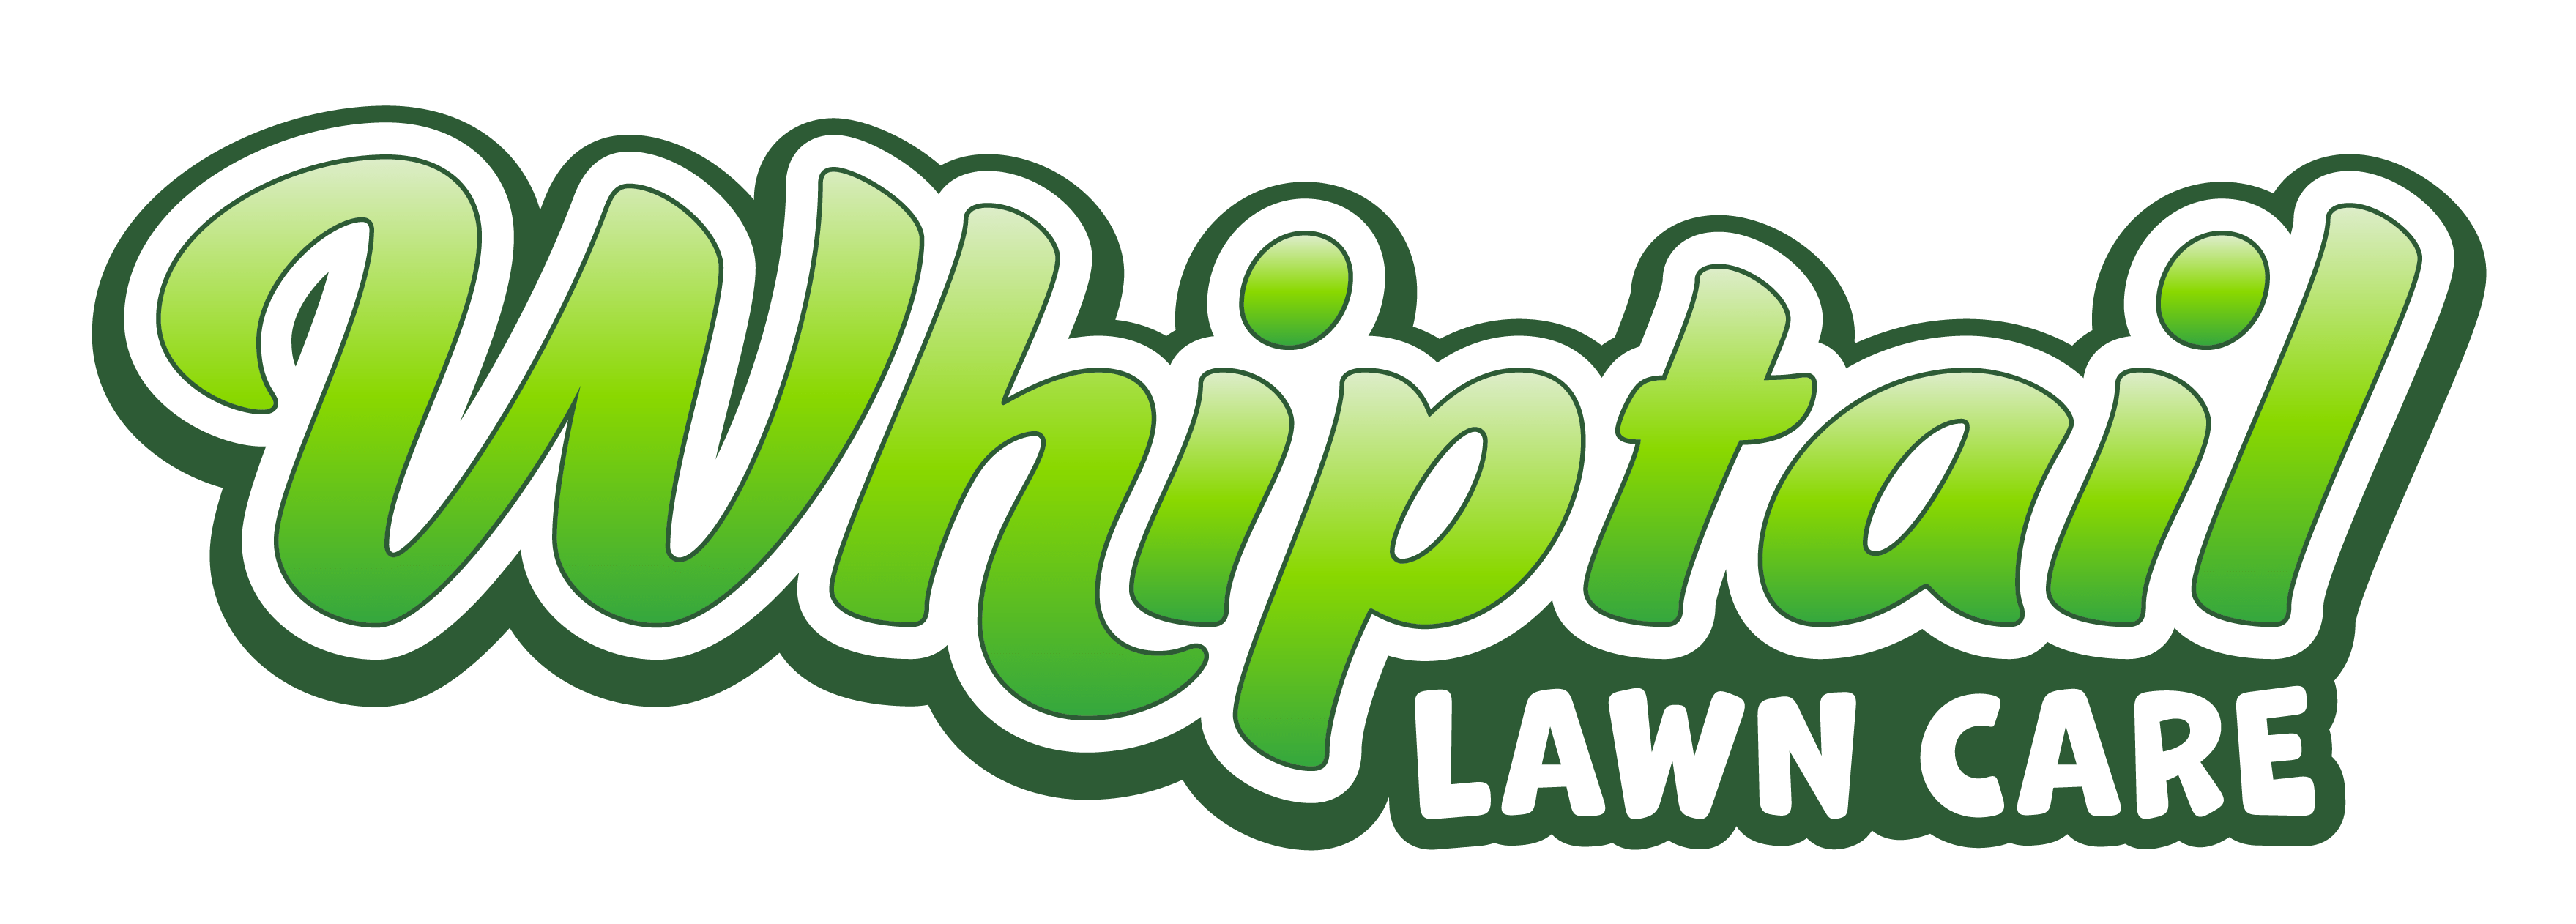 Whiptail lawn care text logo